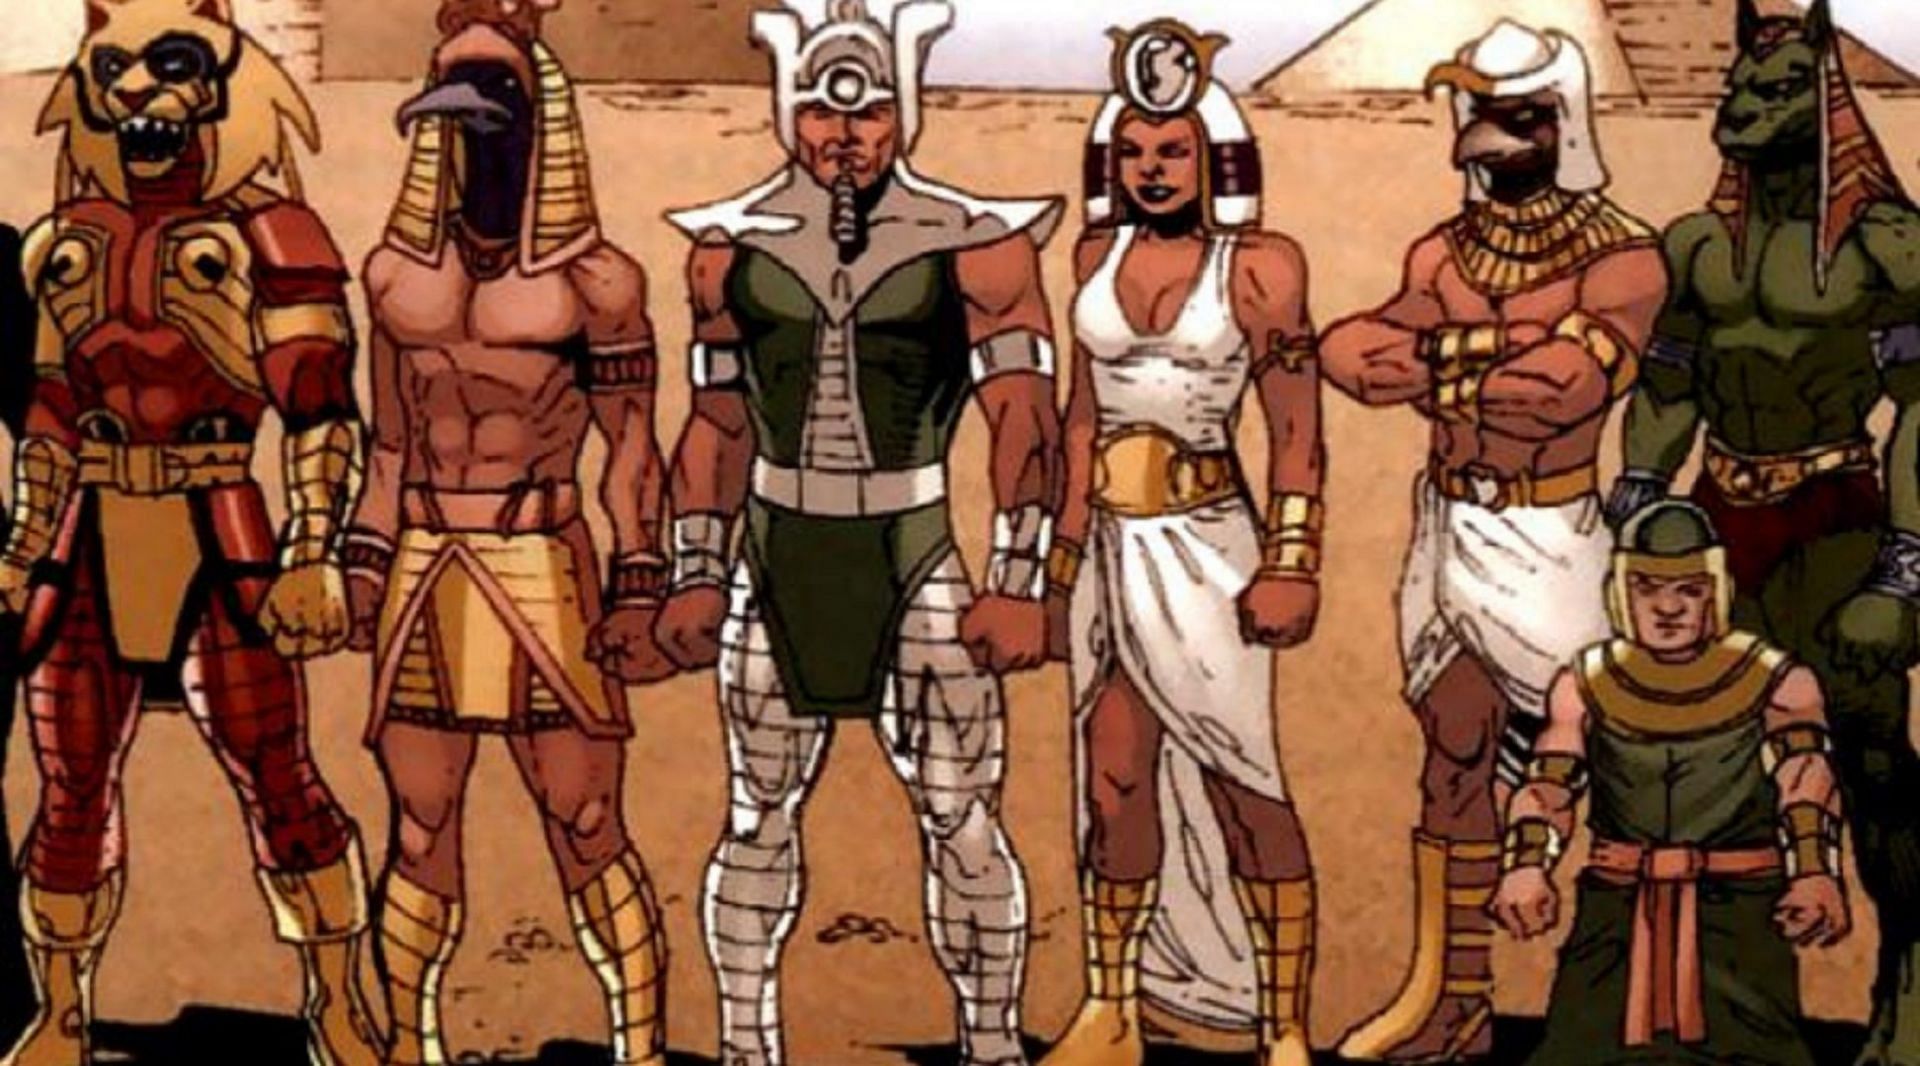 All the Egyptian Gods in the group have extraordinary superpowers (Image via Marvel)